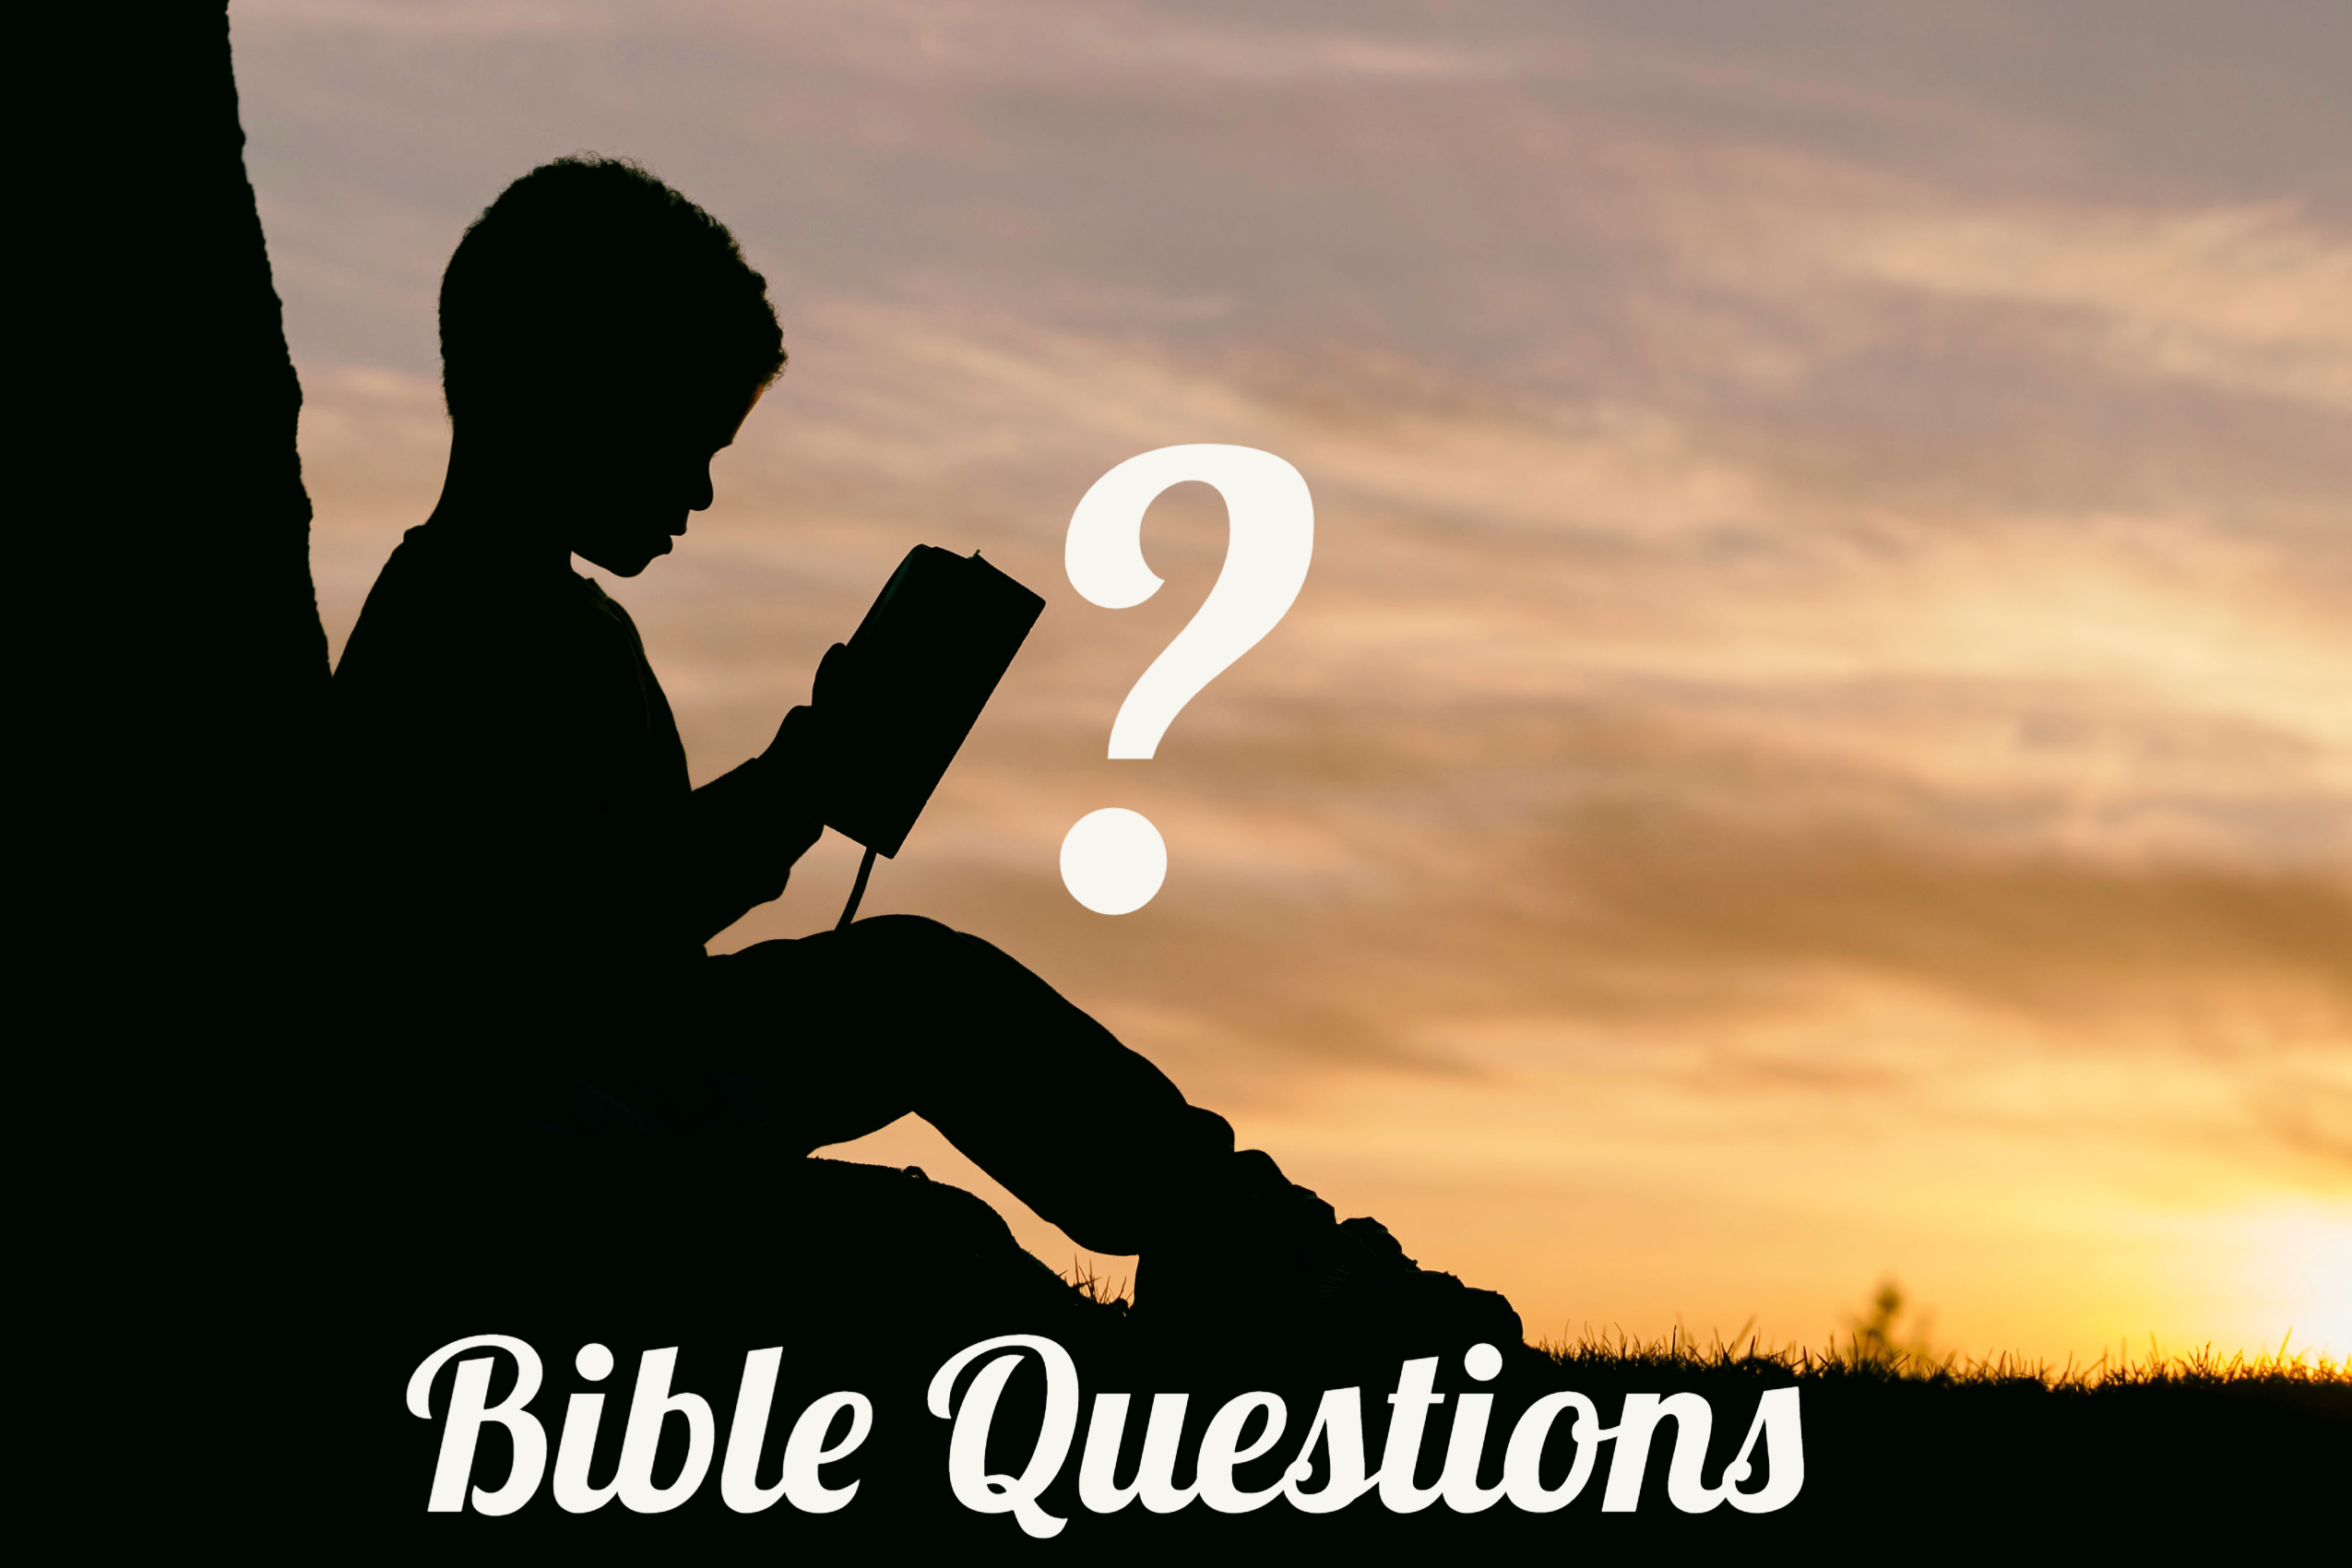 30 Questions About the Bible